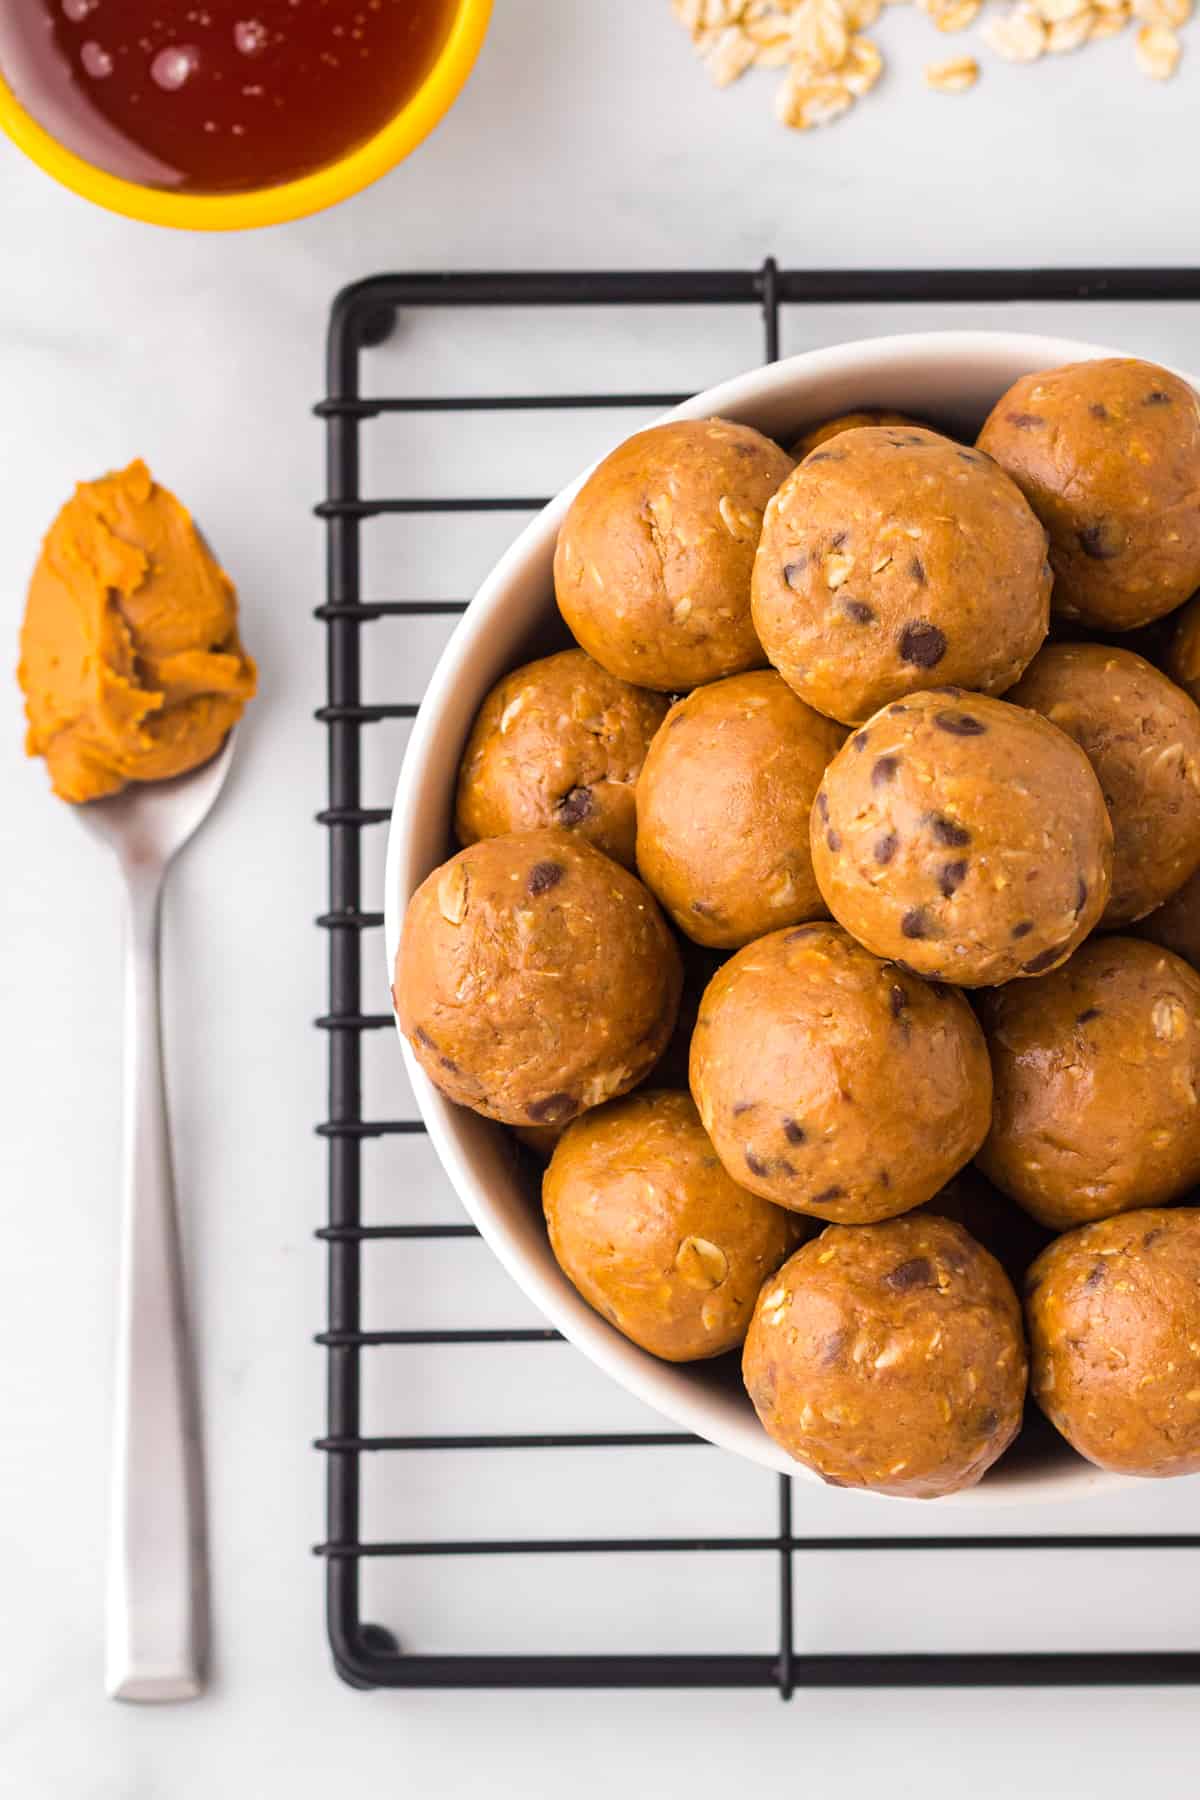 Chocolate Peanut Butter Protein Balls - Organize Yourself Skinny